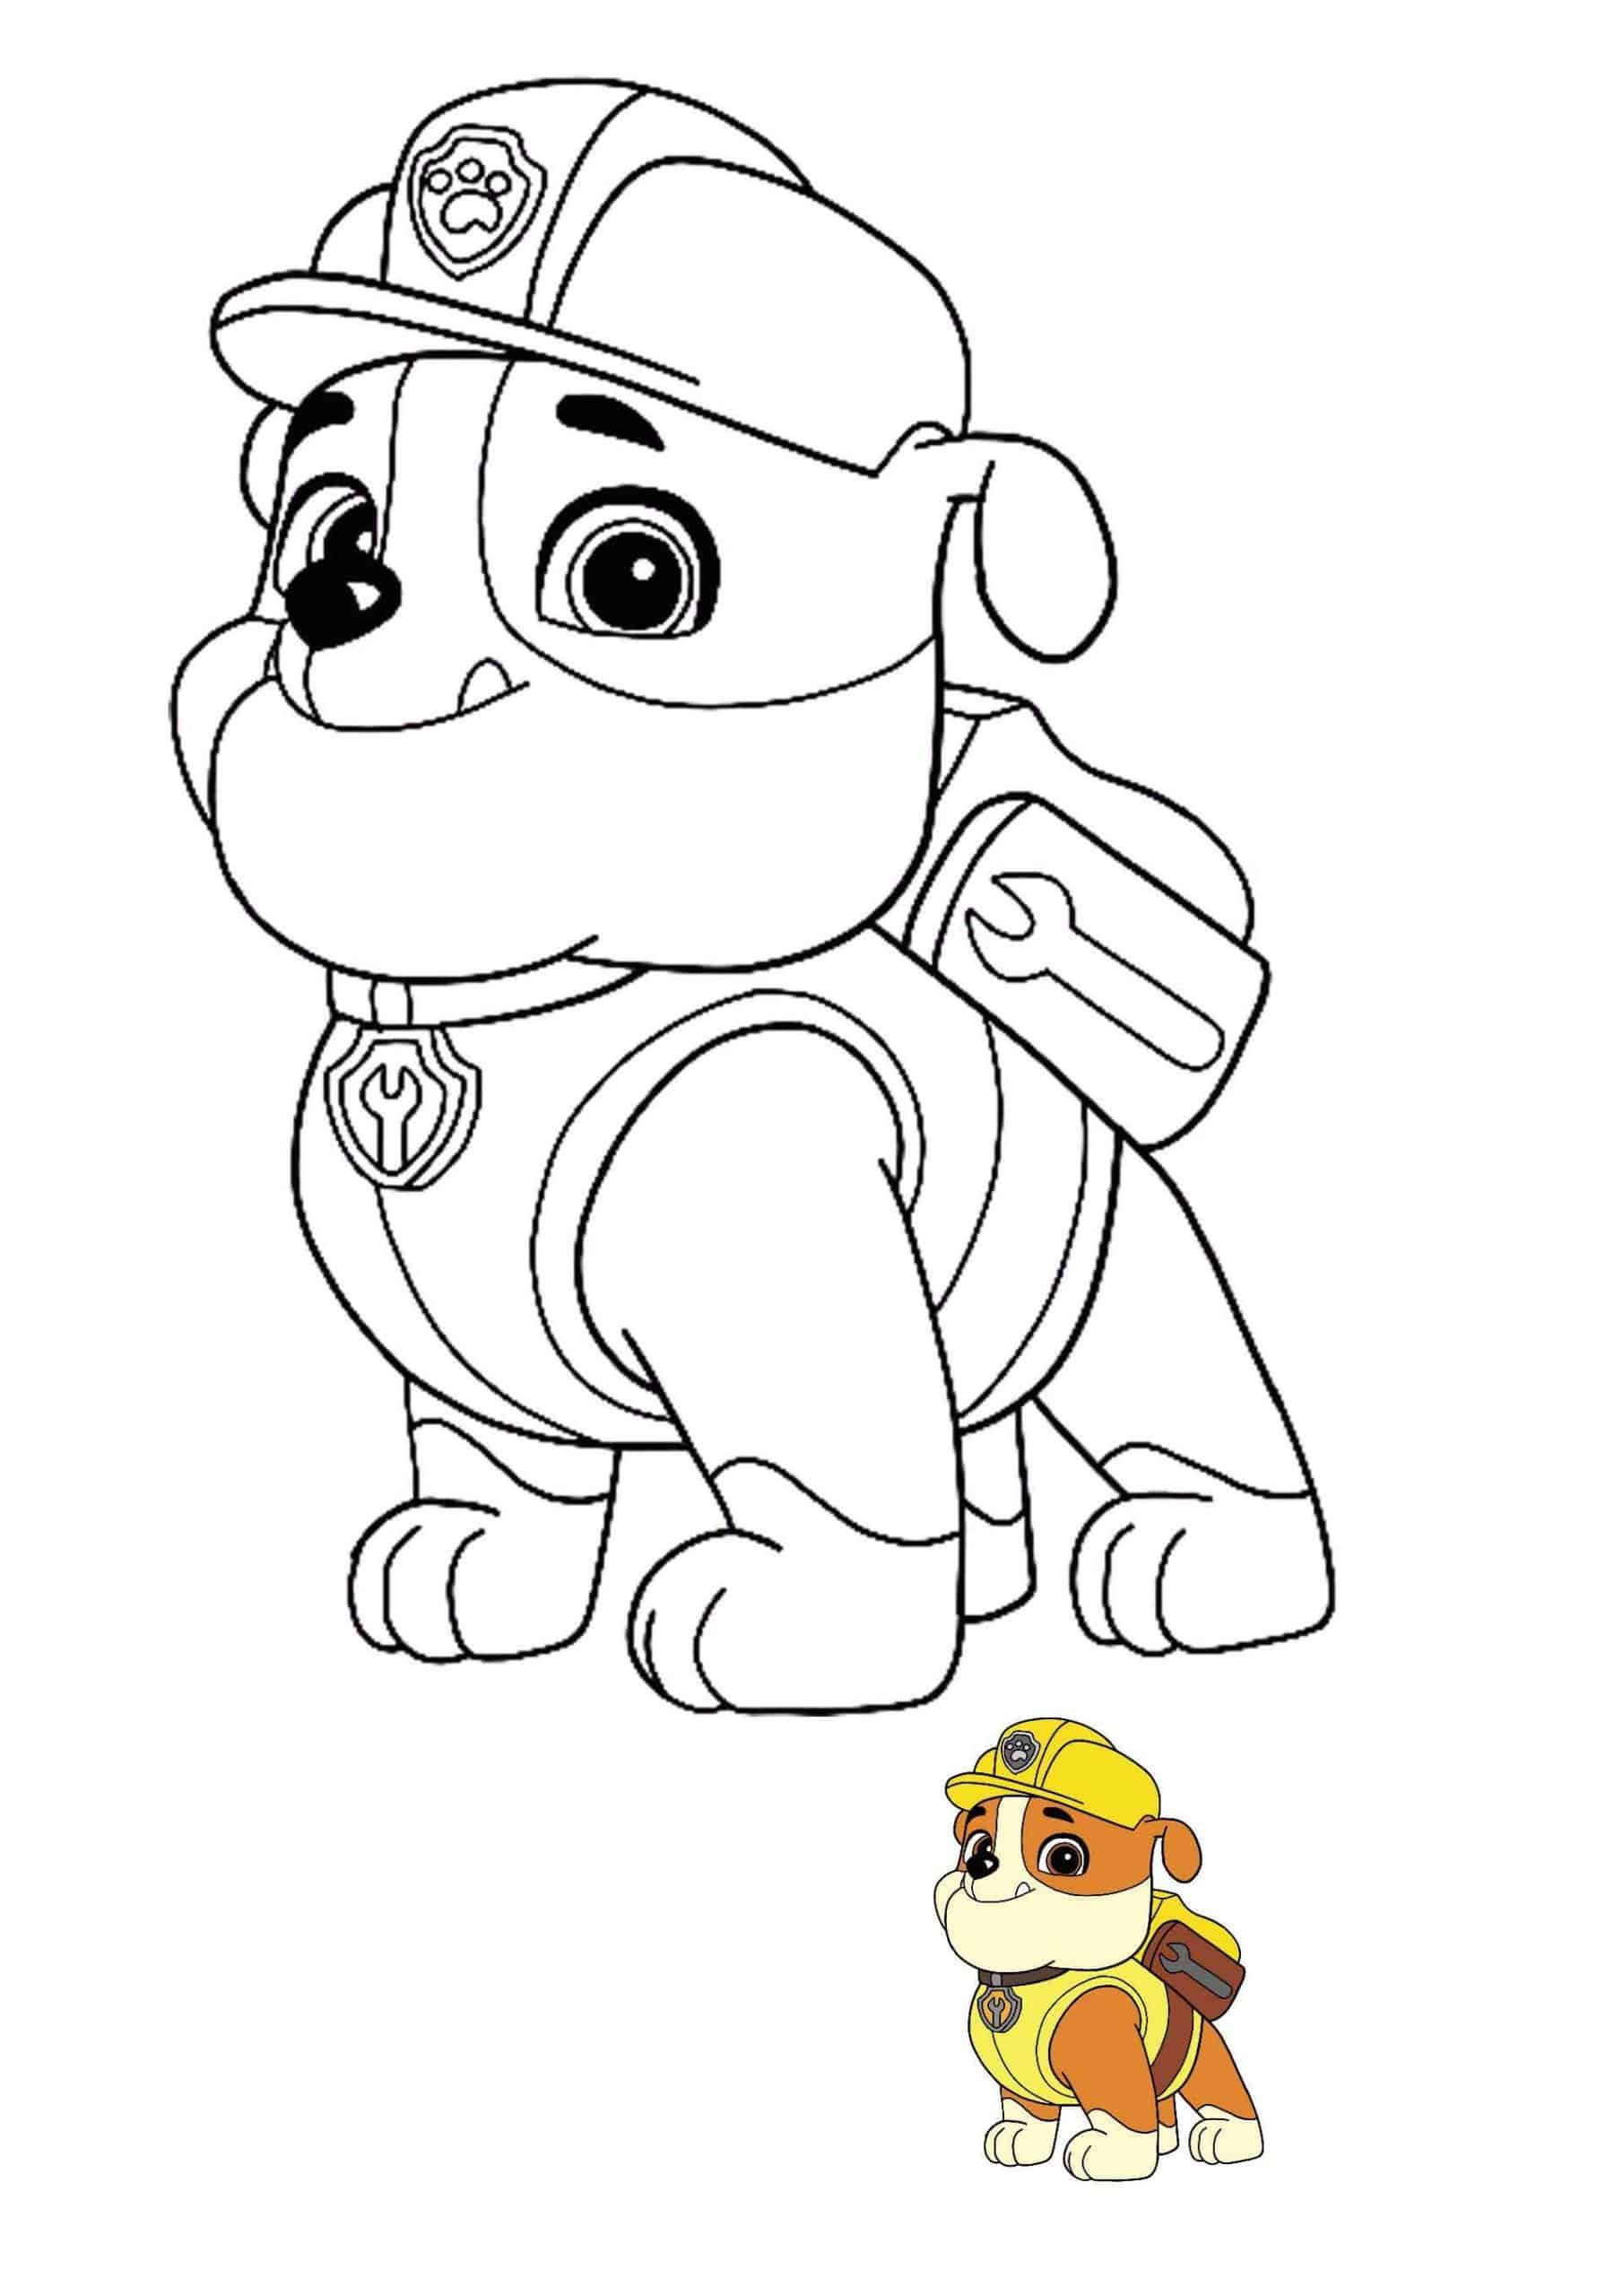 Paw patrol rubble coloring page with preview paw patrol coloring paw patrol coloring pages rubble paw patrol